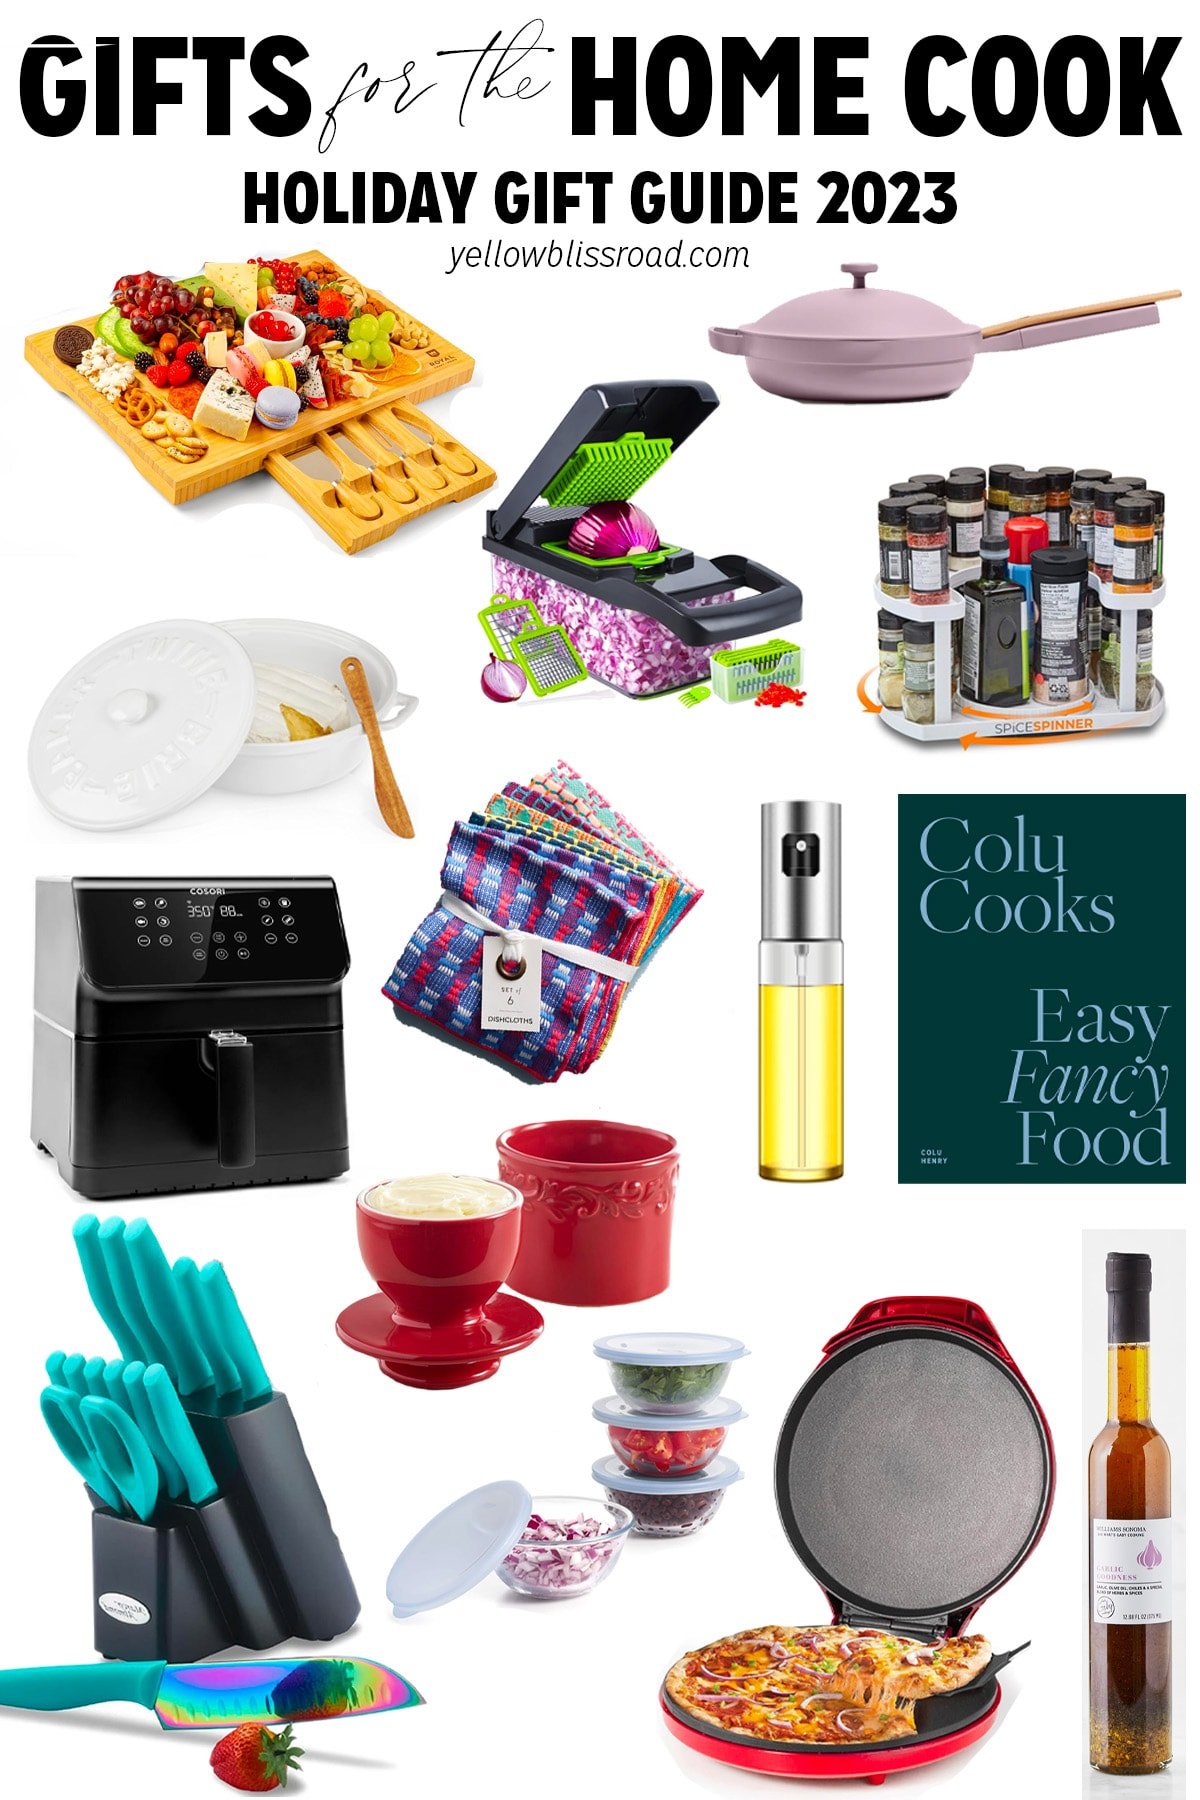 Holiday Gift Guide - Top Gifts for the Home Cook! - Flavor of Italy